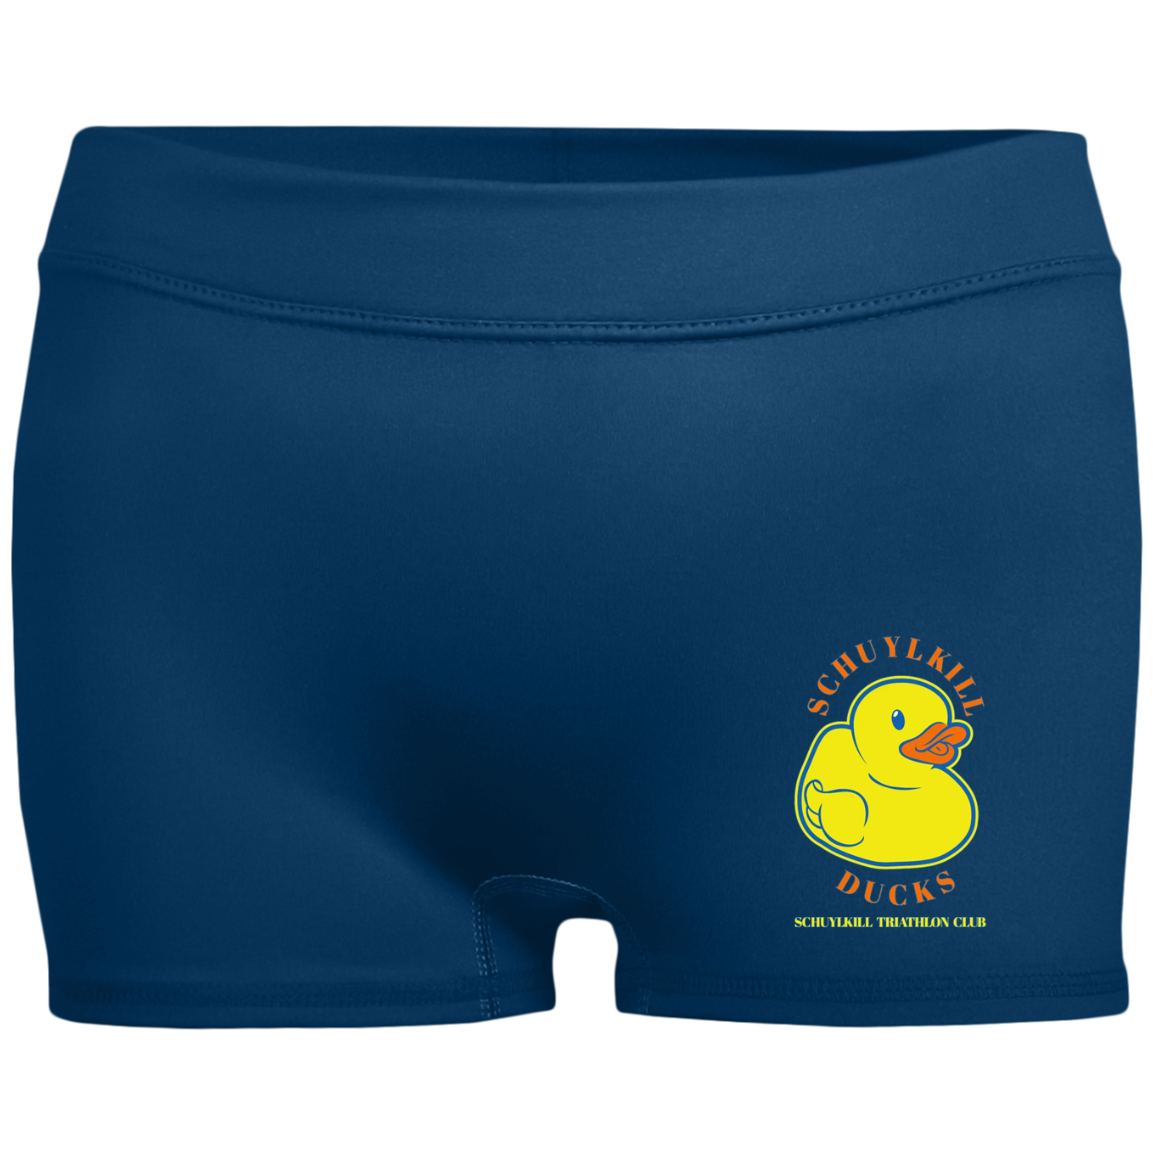 Ducks TeamStore Ladies' Fitted Moisture-Wicking 2.5 inch Shorts